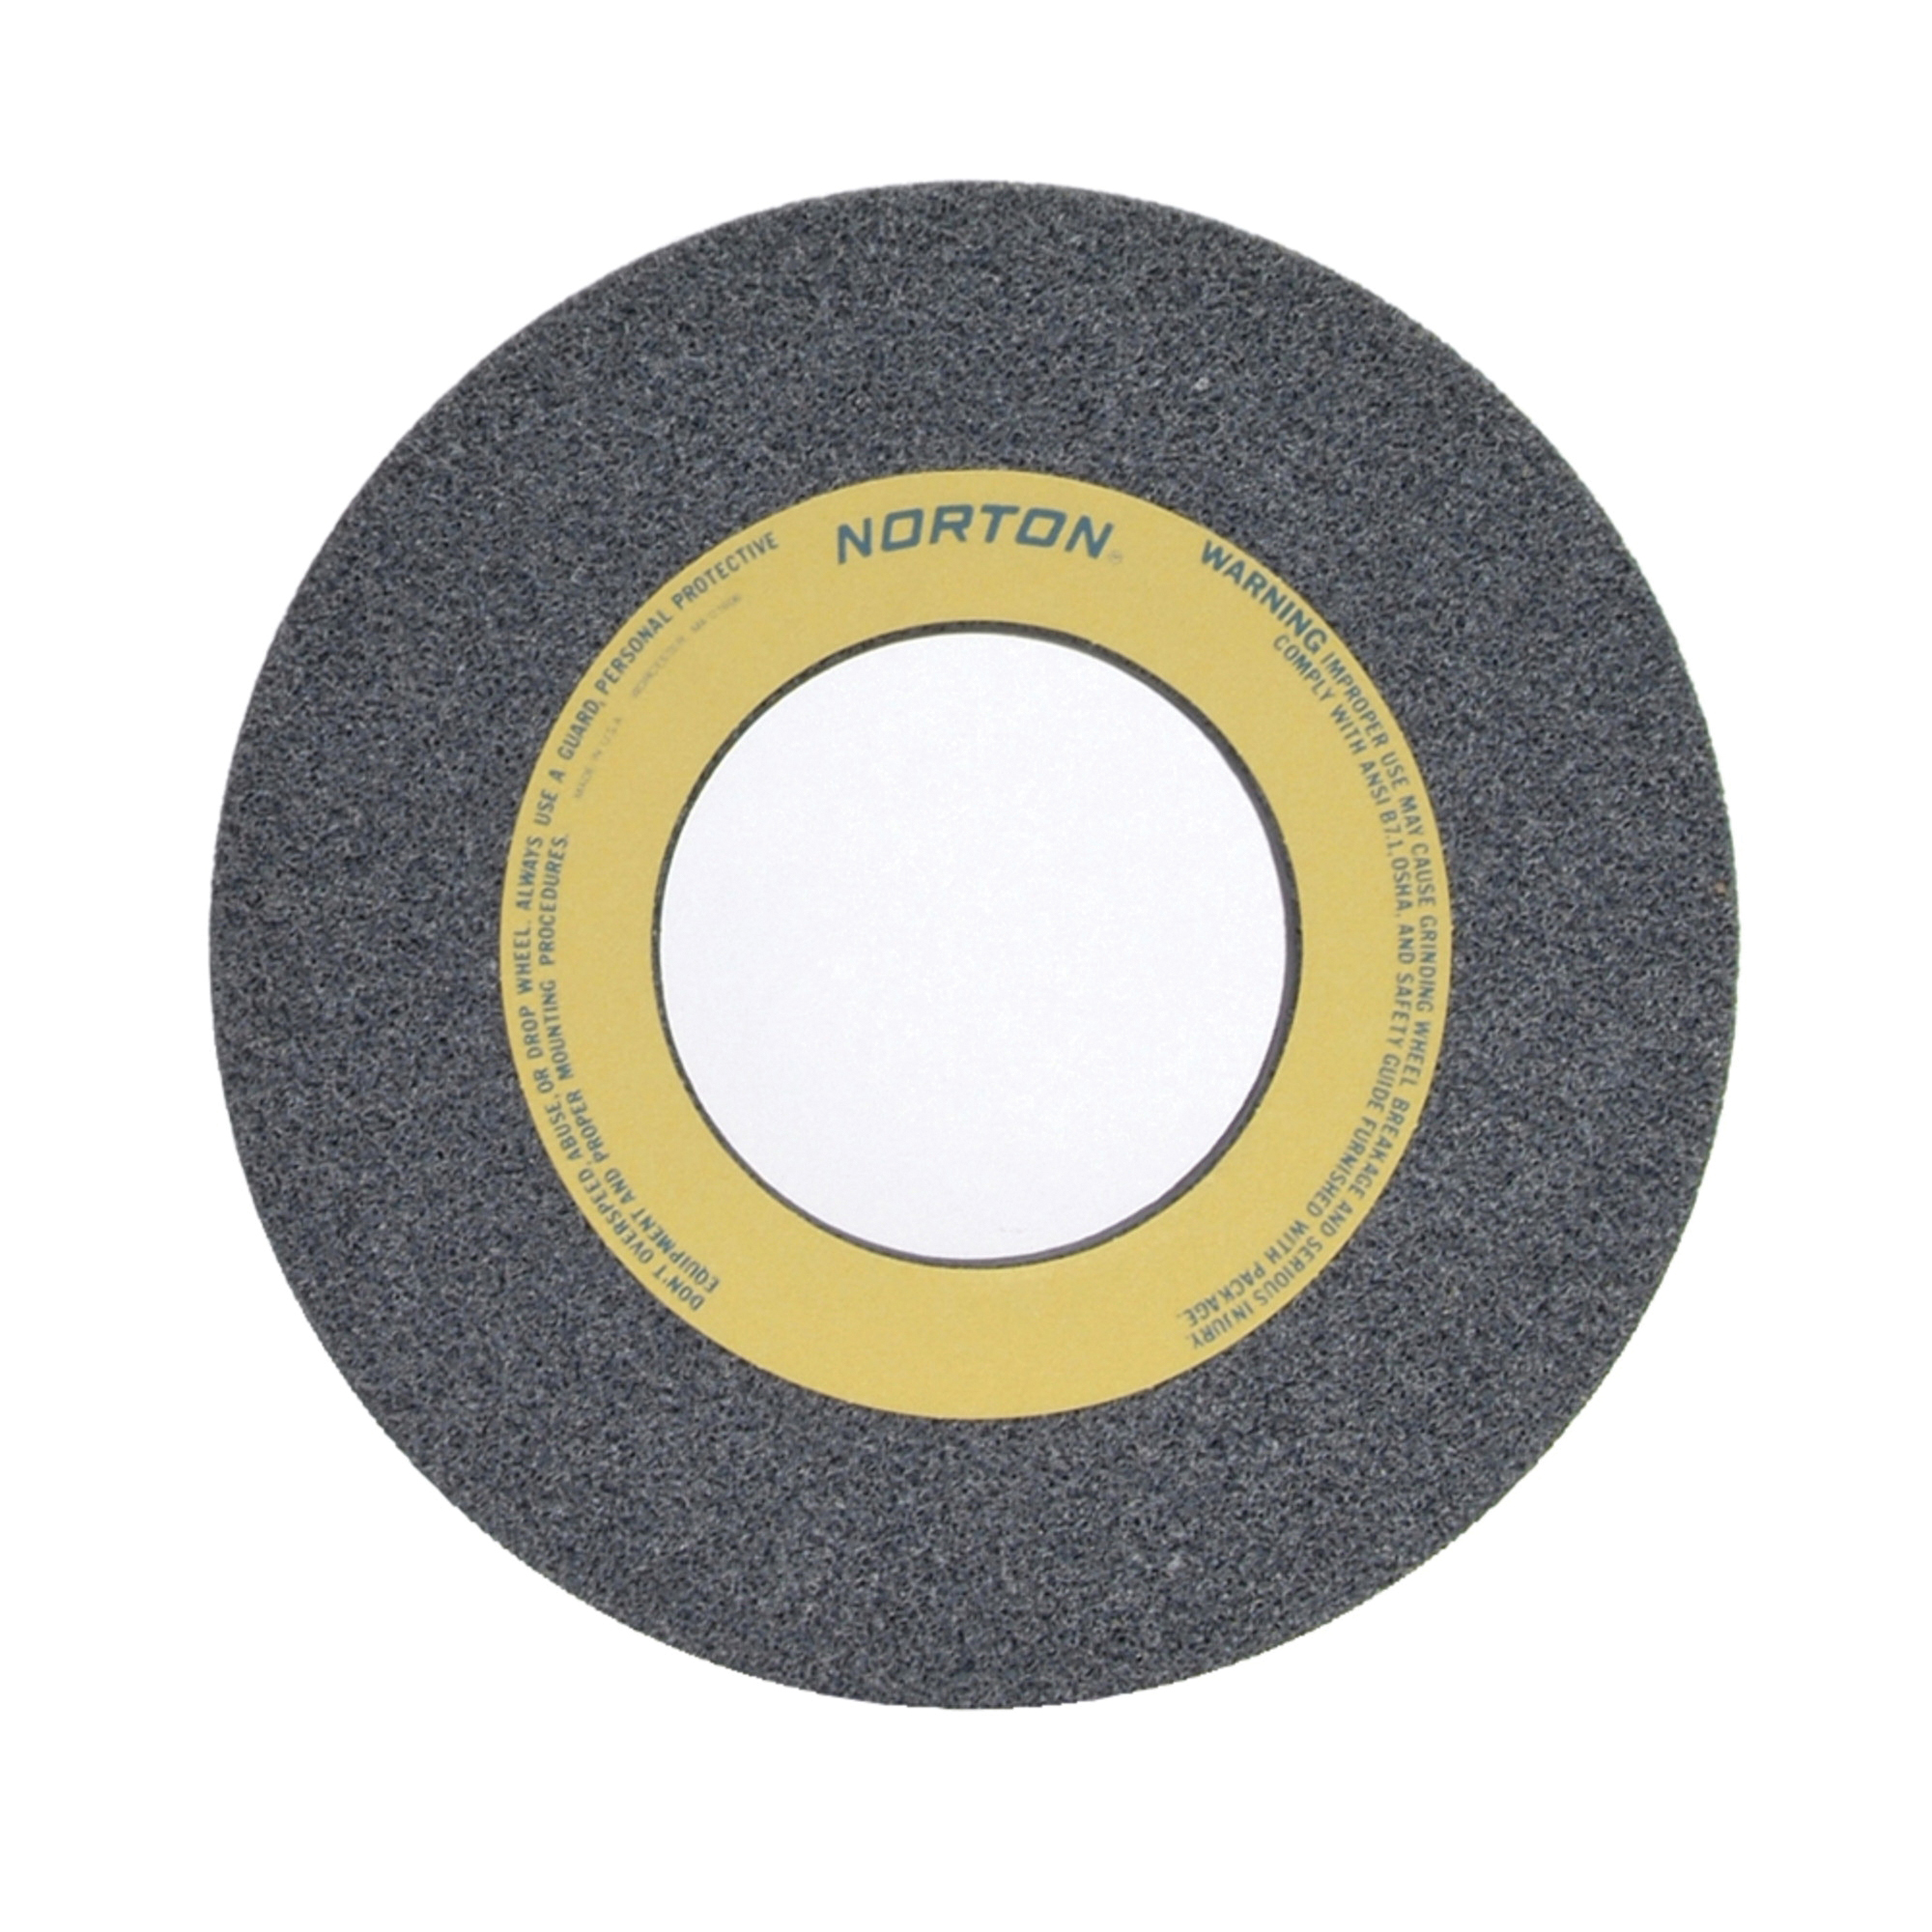 Norton® 66253306790 32AA Straight Toolroom Wheel, 14 in Dia x 1-1/2 in THK, 5 in Center Hole, 46 Grit, Aluminum Oxide Abrasive